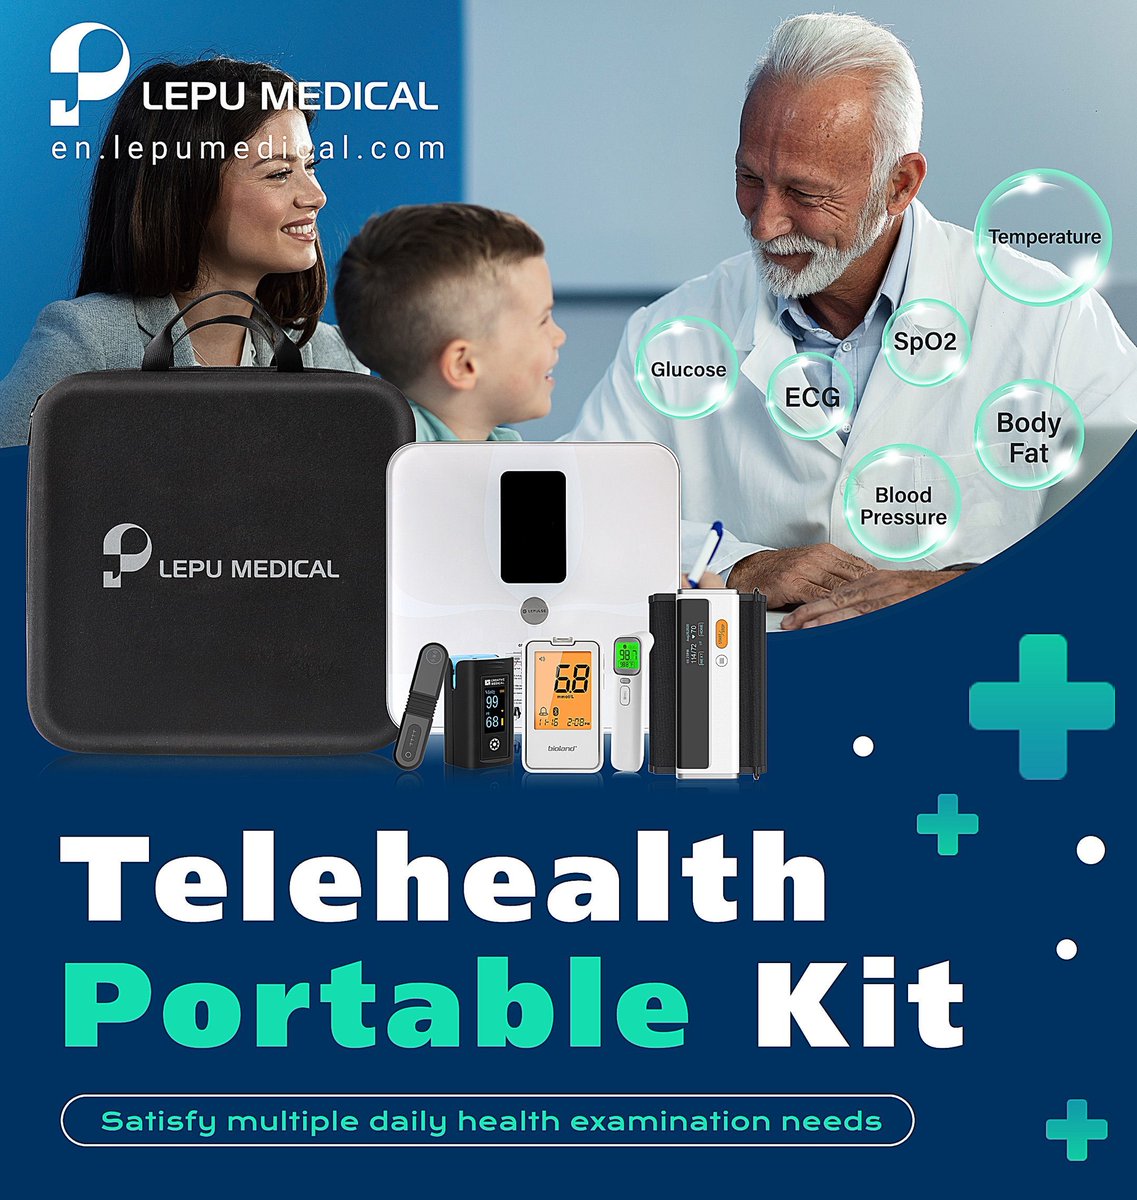 Our telehealth portable kit includes a series of products which can satisfy multiple daily health examination needs and can be applied in a wide range of scenarios.

#LepuMedical #vitalsigns #bodyfat #NIBP #ECG #glucose 

📧>>marketing@lepu-medical.com 
>>en.lepumedical.com